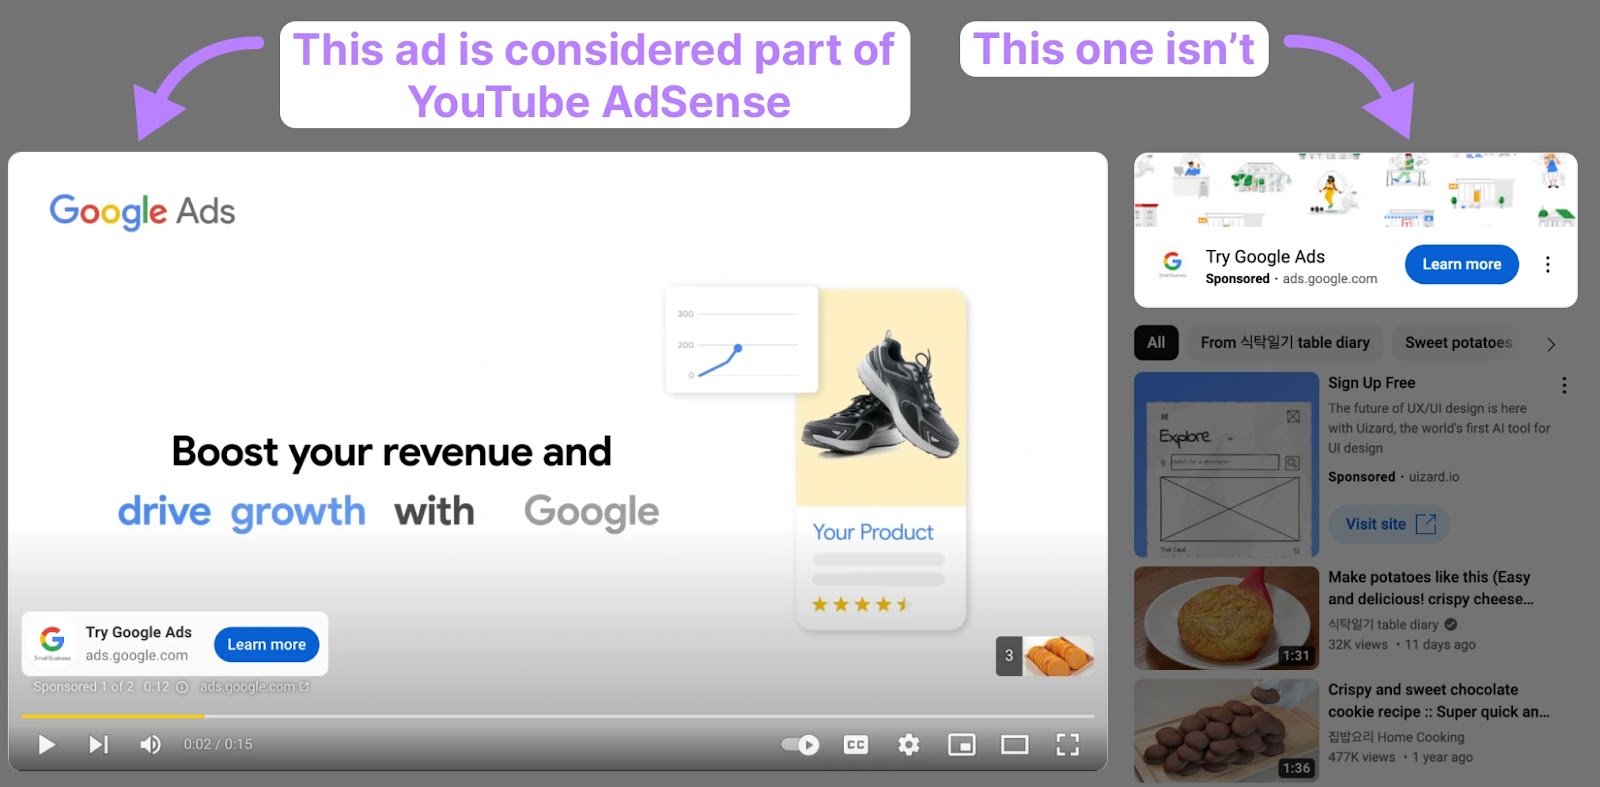 YouTube AdSense: How to Earn Money from Your Videos